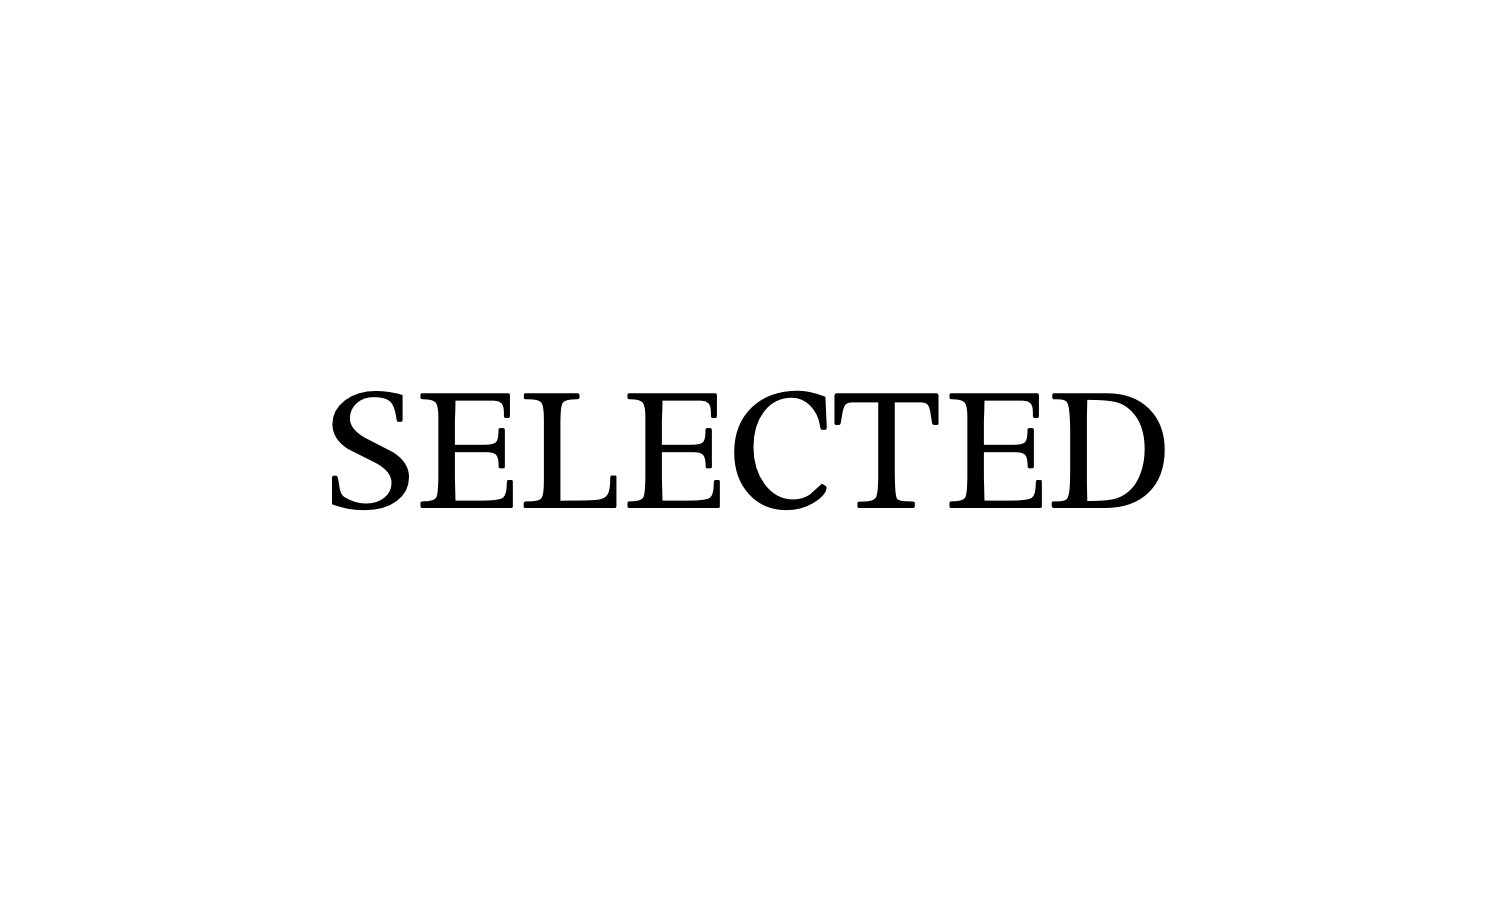 “SELECTED